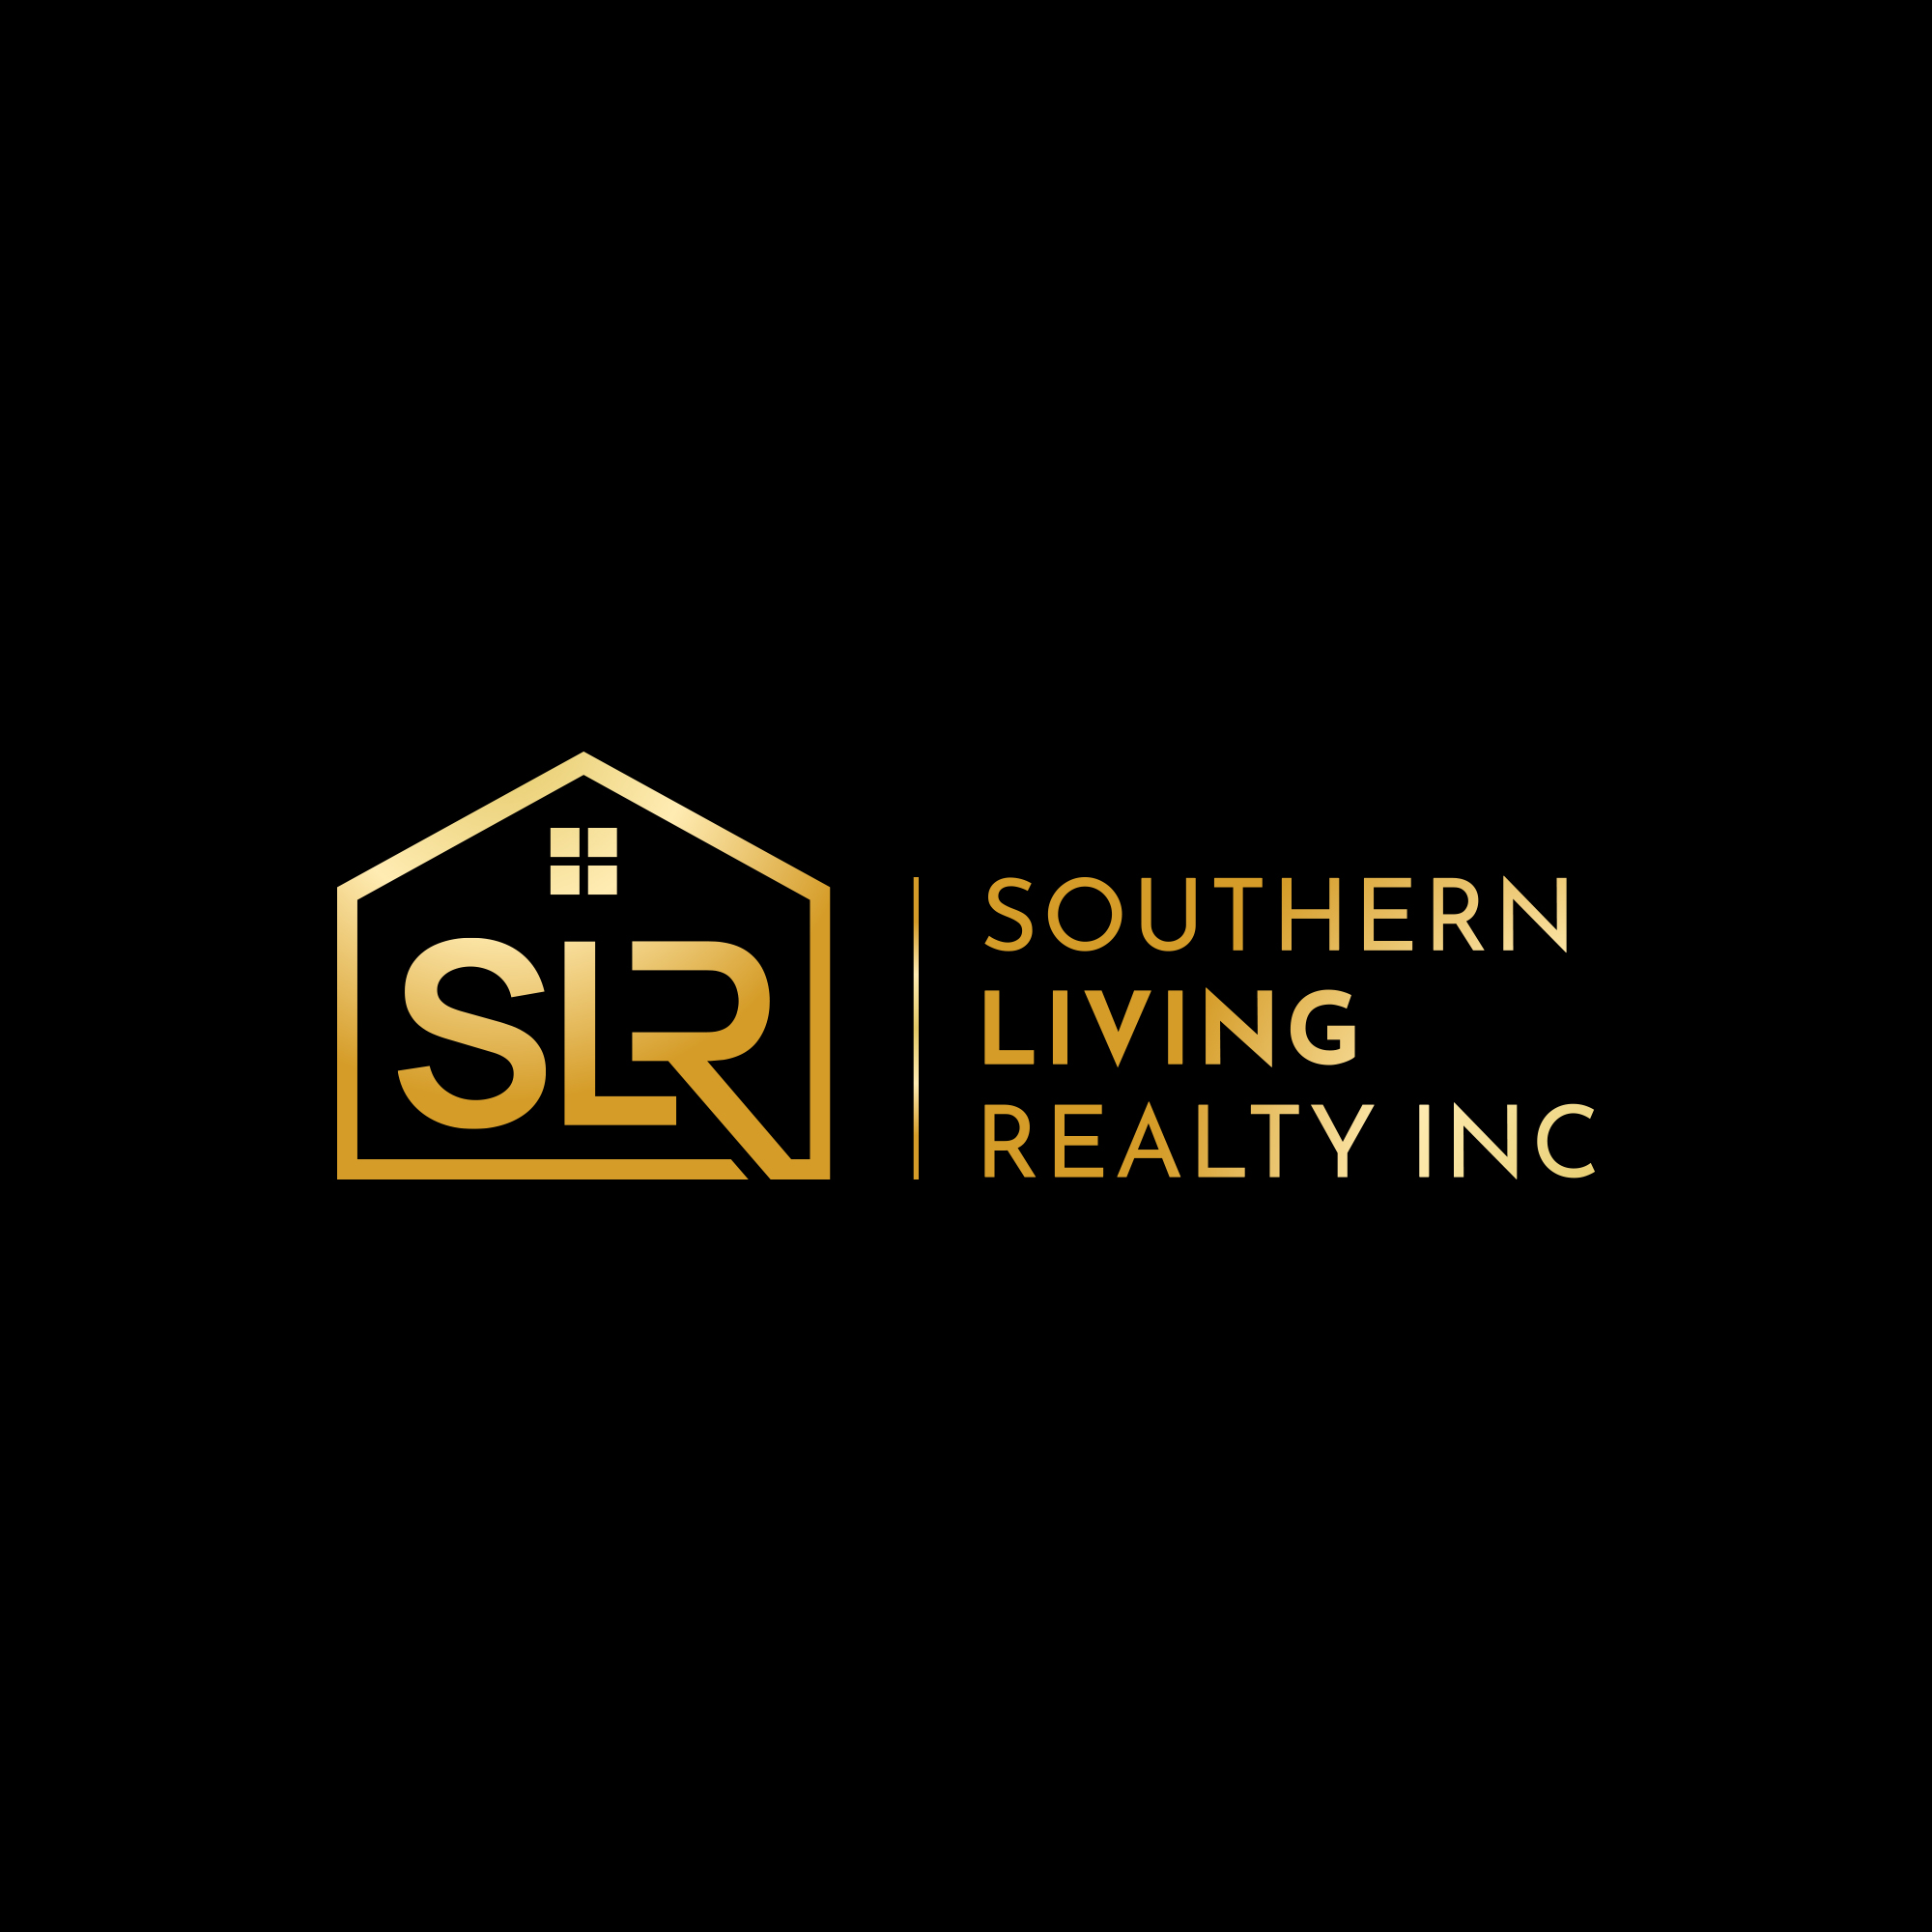 Southern Living Realty Inc